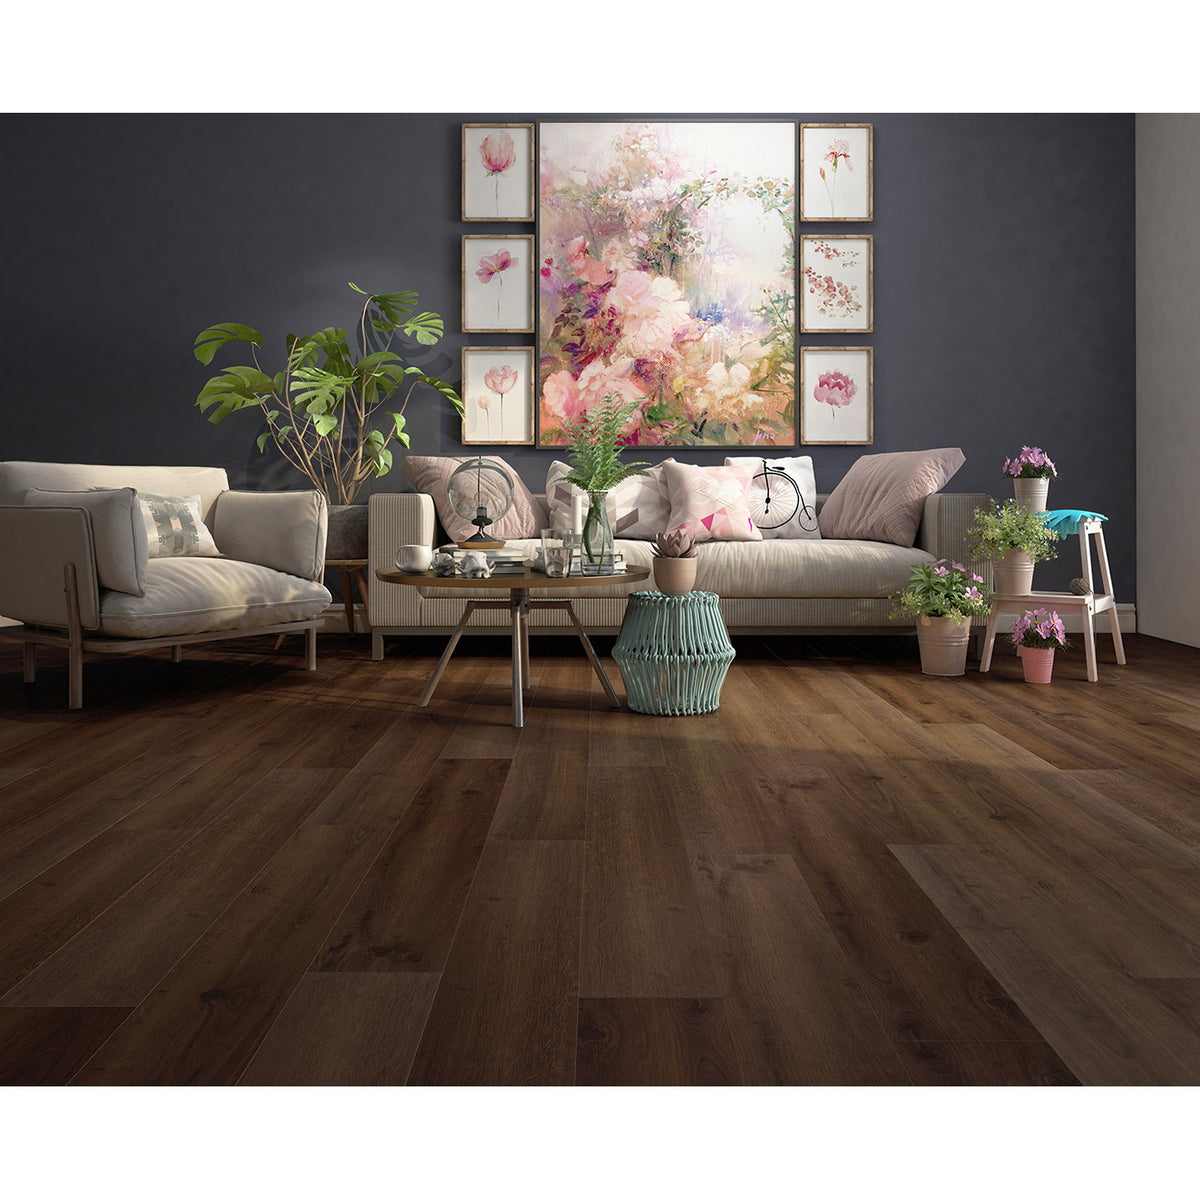 Inhaus - Solido Visions Collection - Cask (Dark Brown) Oak Room View